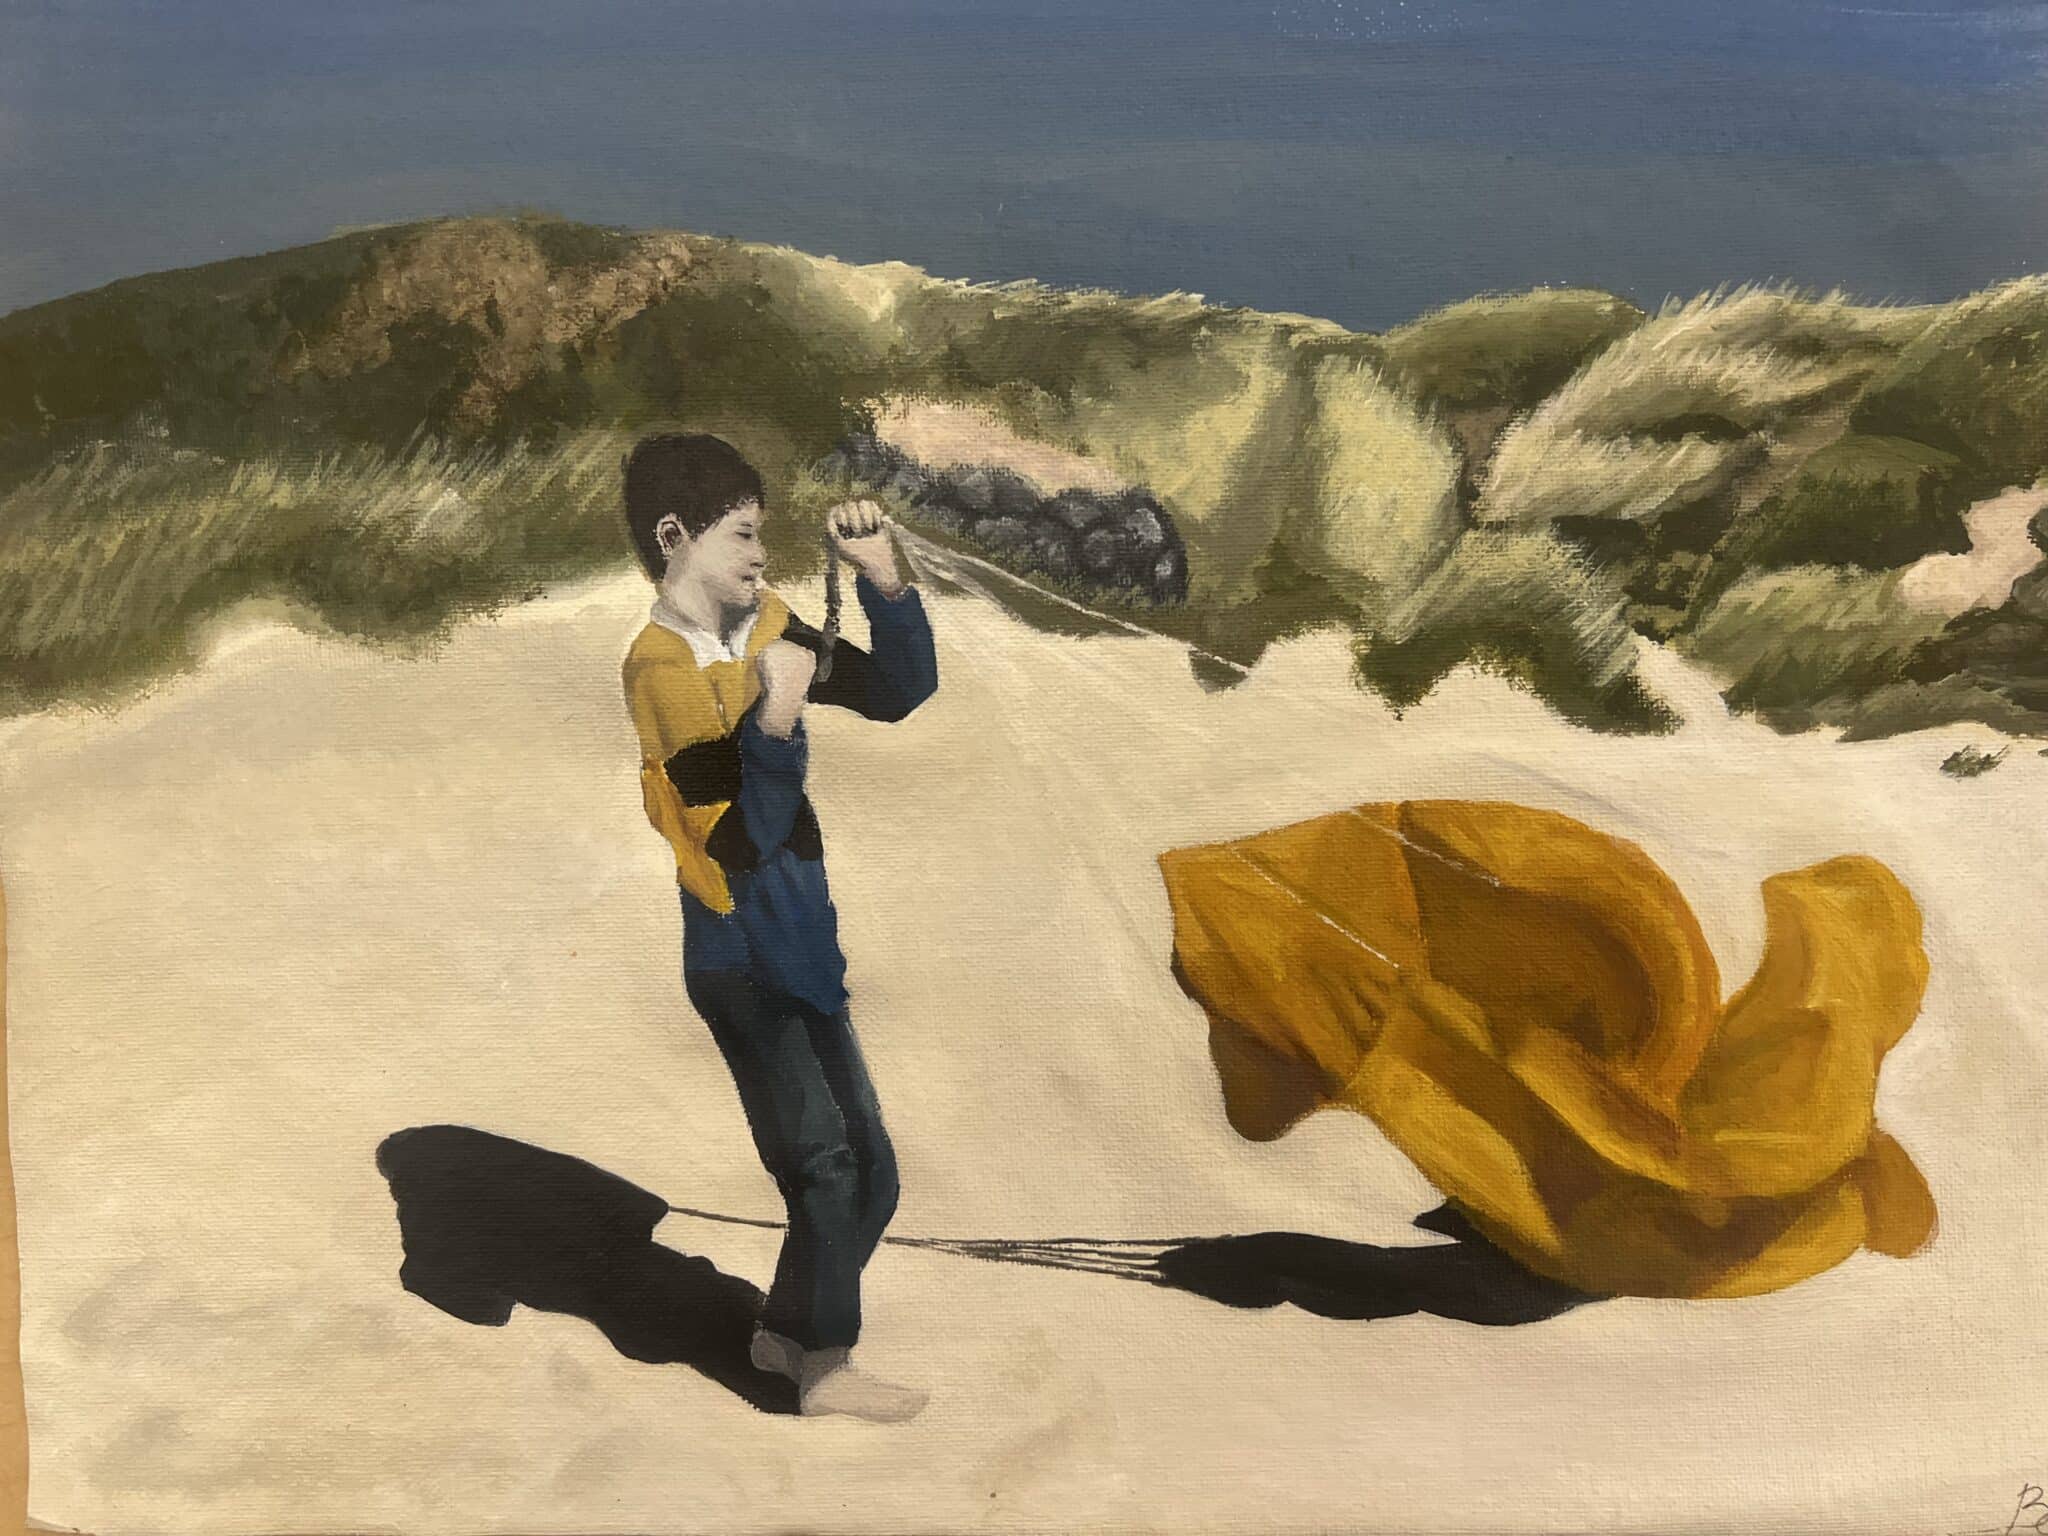 SCA Junior Isabella Wilson’s acrylic painting “Kite on Oregon Beach” received second place in the fifth Congressional Art Competition 2023.